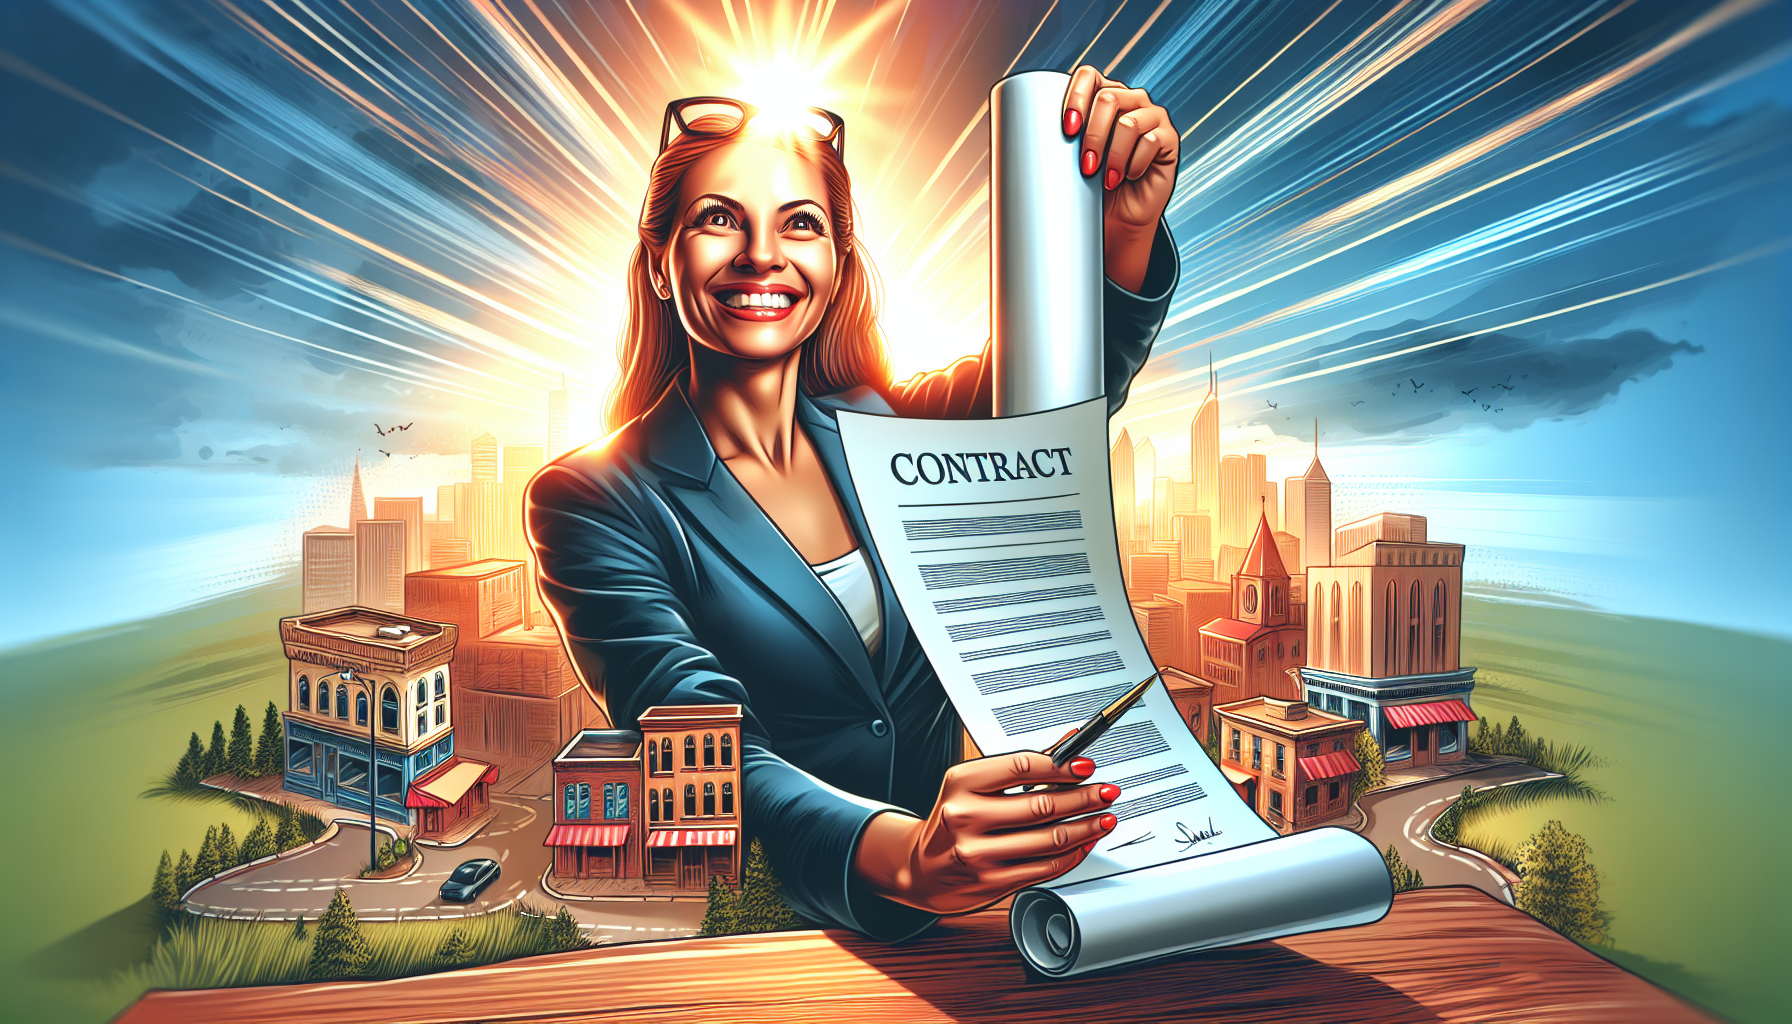 Illustration of a small business owner with a contract in hand, symbolizing subcontracting opportunities under Alliant 3